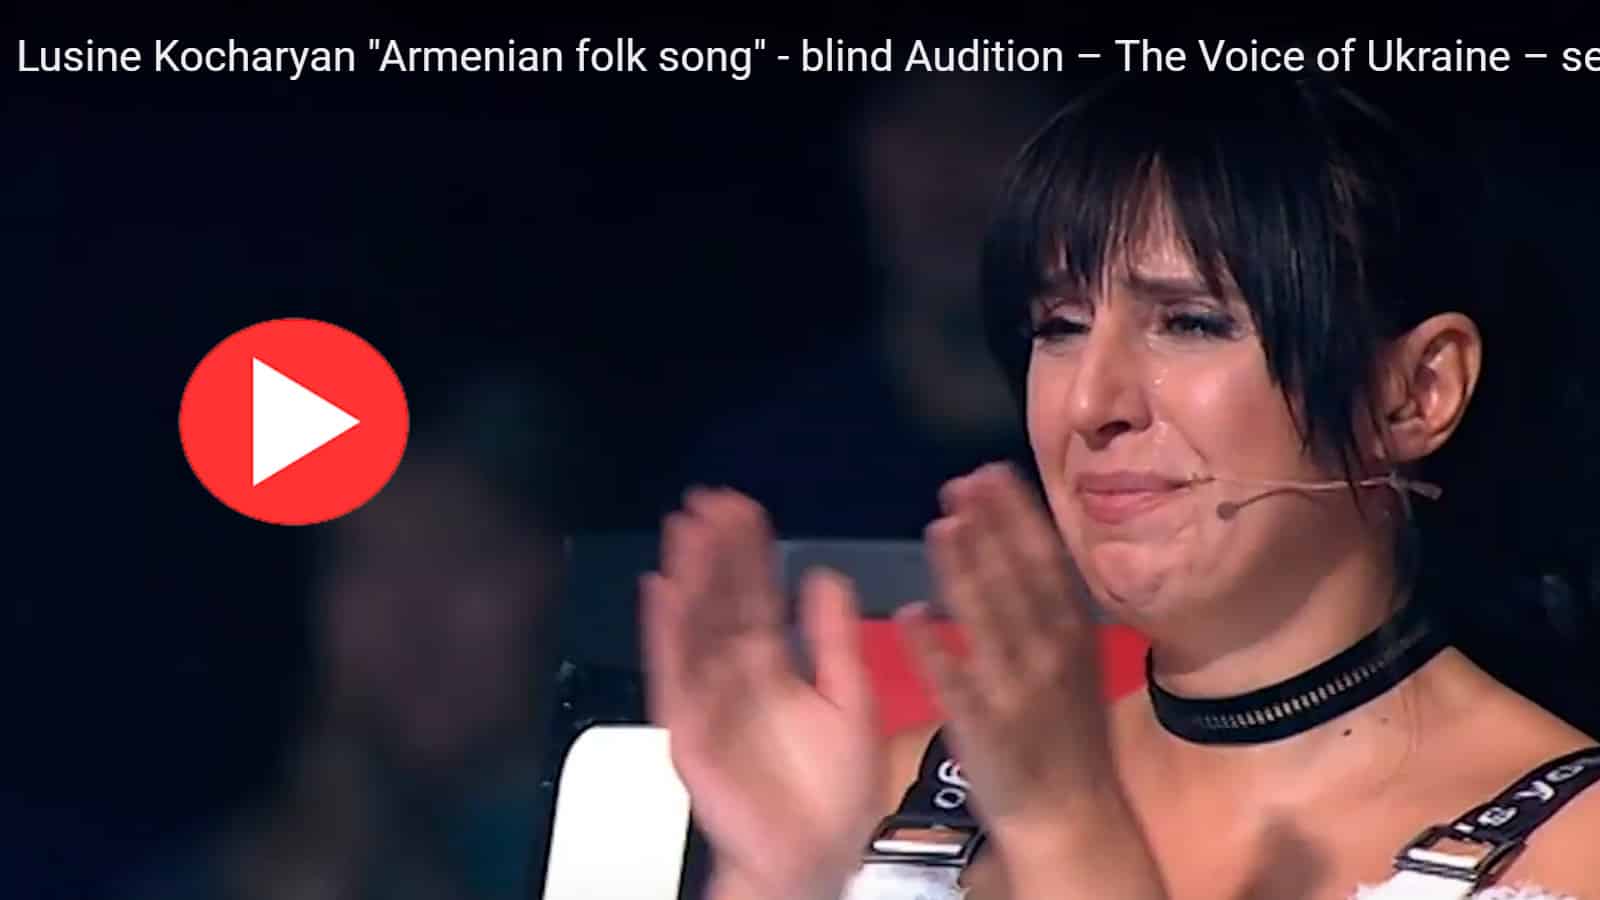 Armenian Participant Makes a Judge of Armenian Roots Cry In The Voice Ukraine